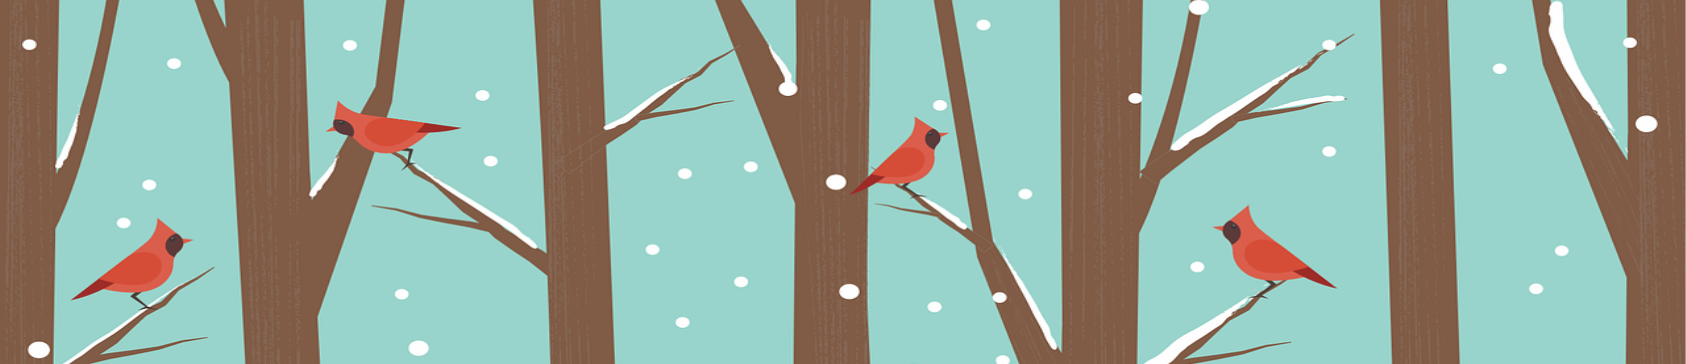 Artistic rendering of bare trees in winter, cardinals perched on four of the branches.